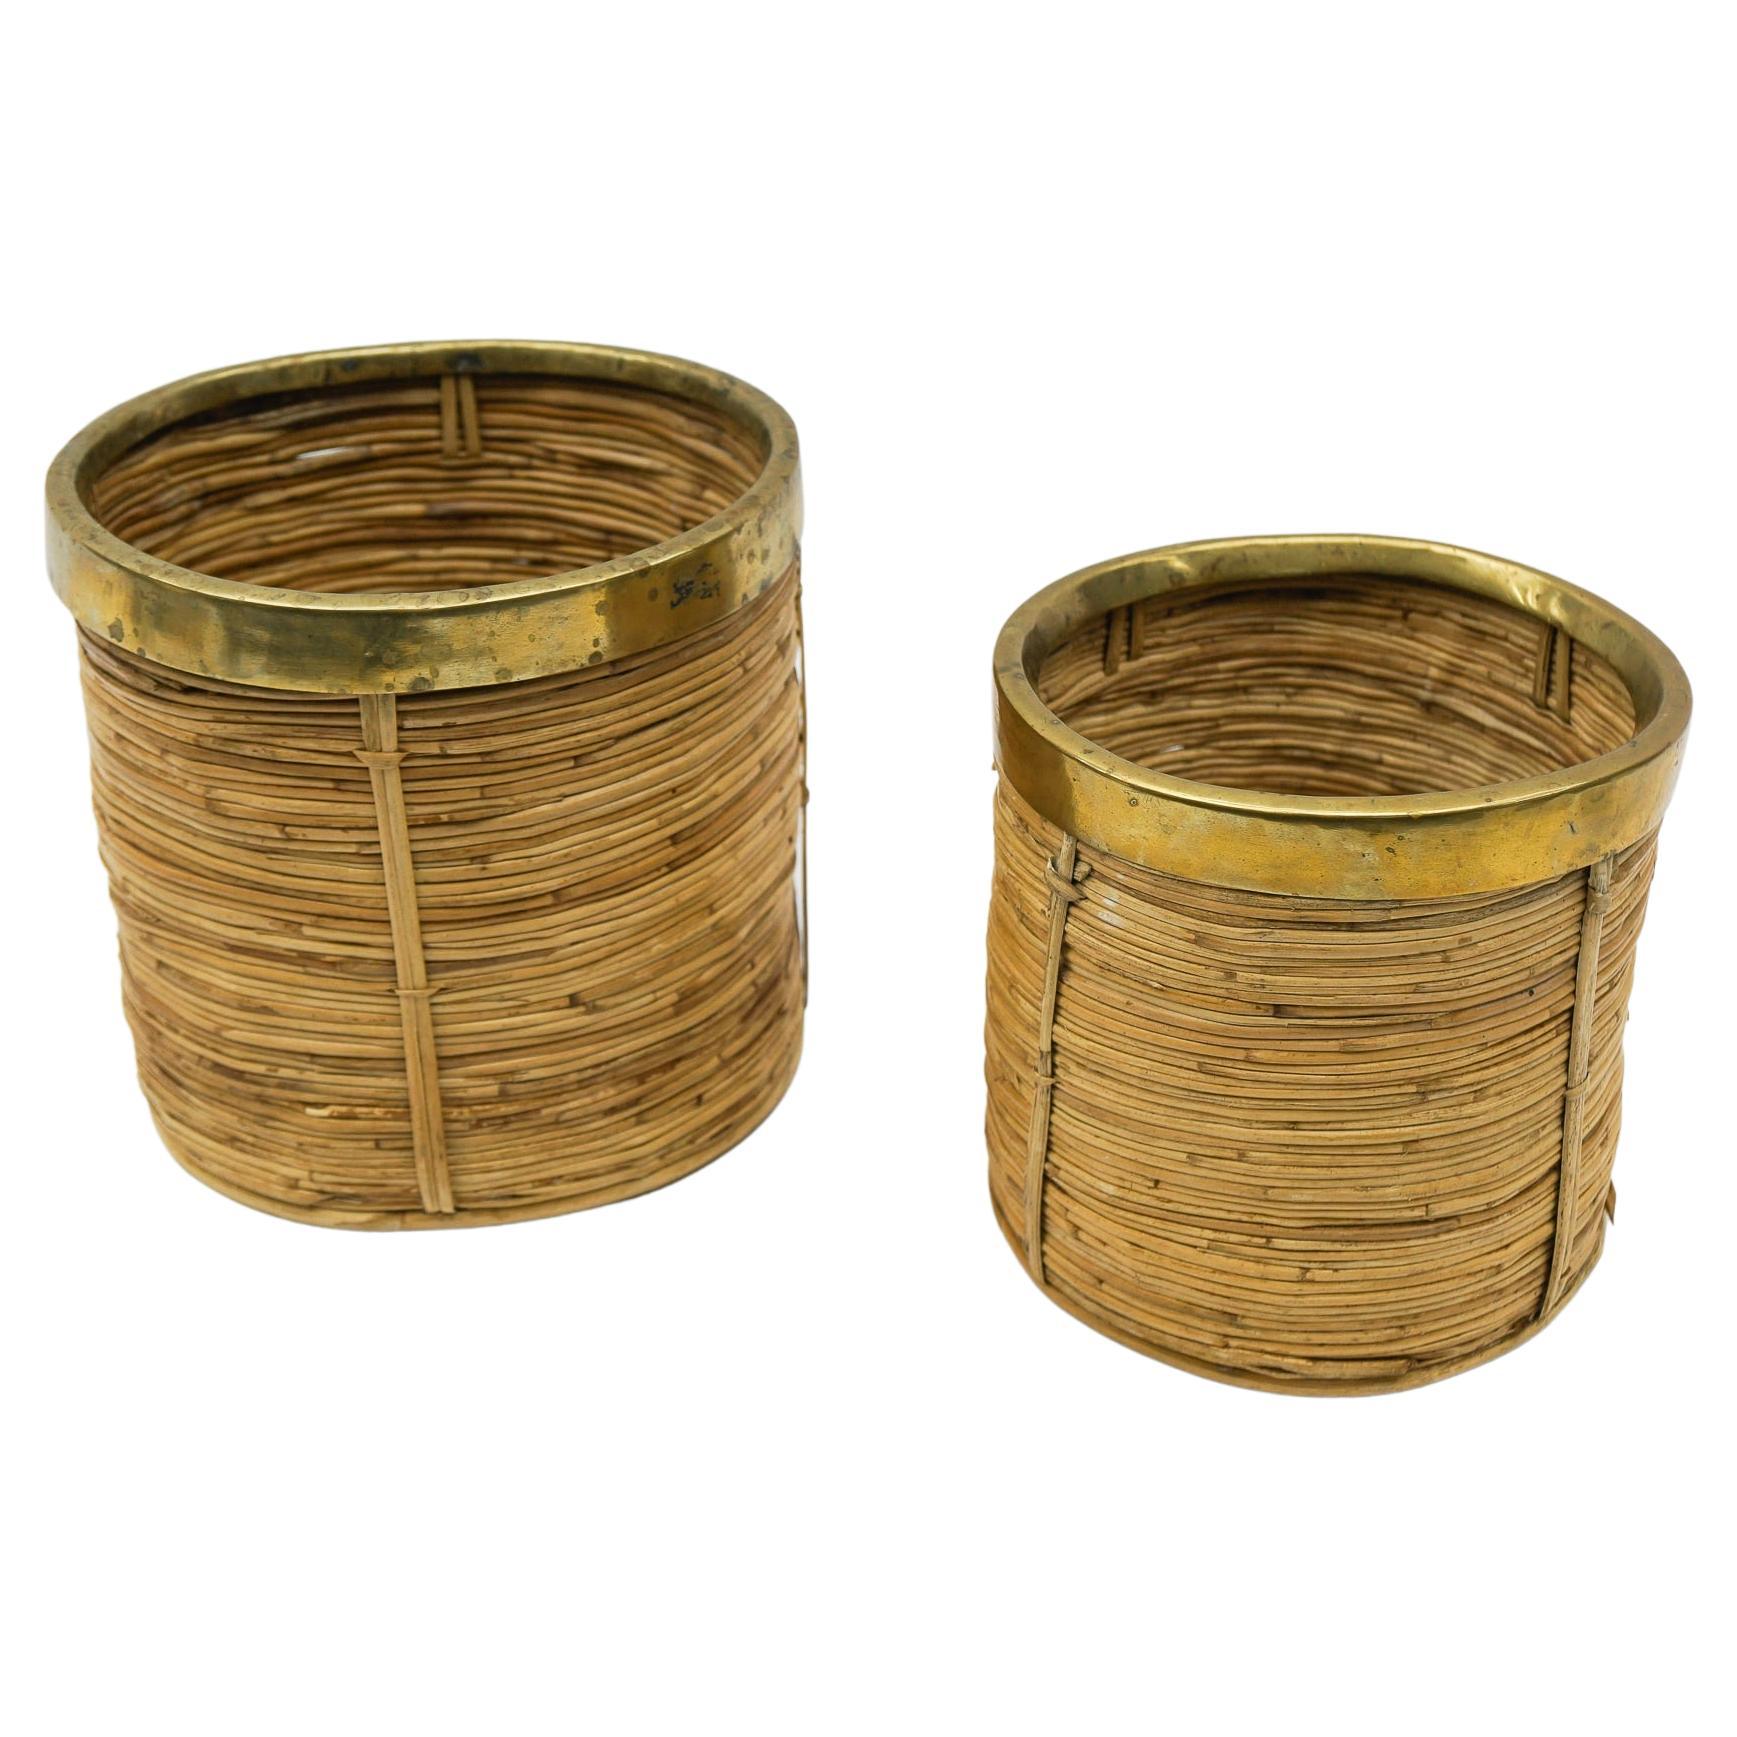 Set of Two Rattan and Brass Midcentury Handcrafted Planter, Austria, 1950s For Sale